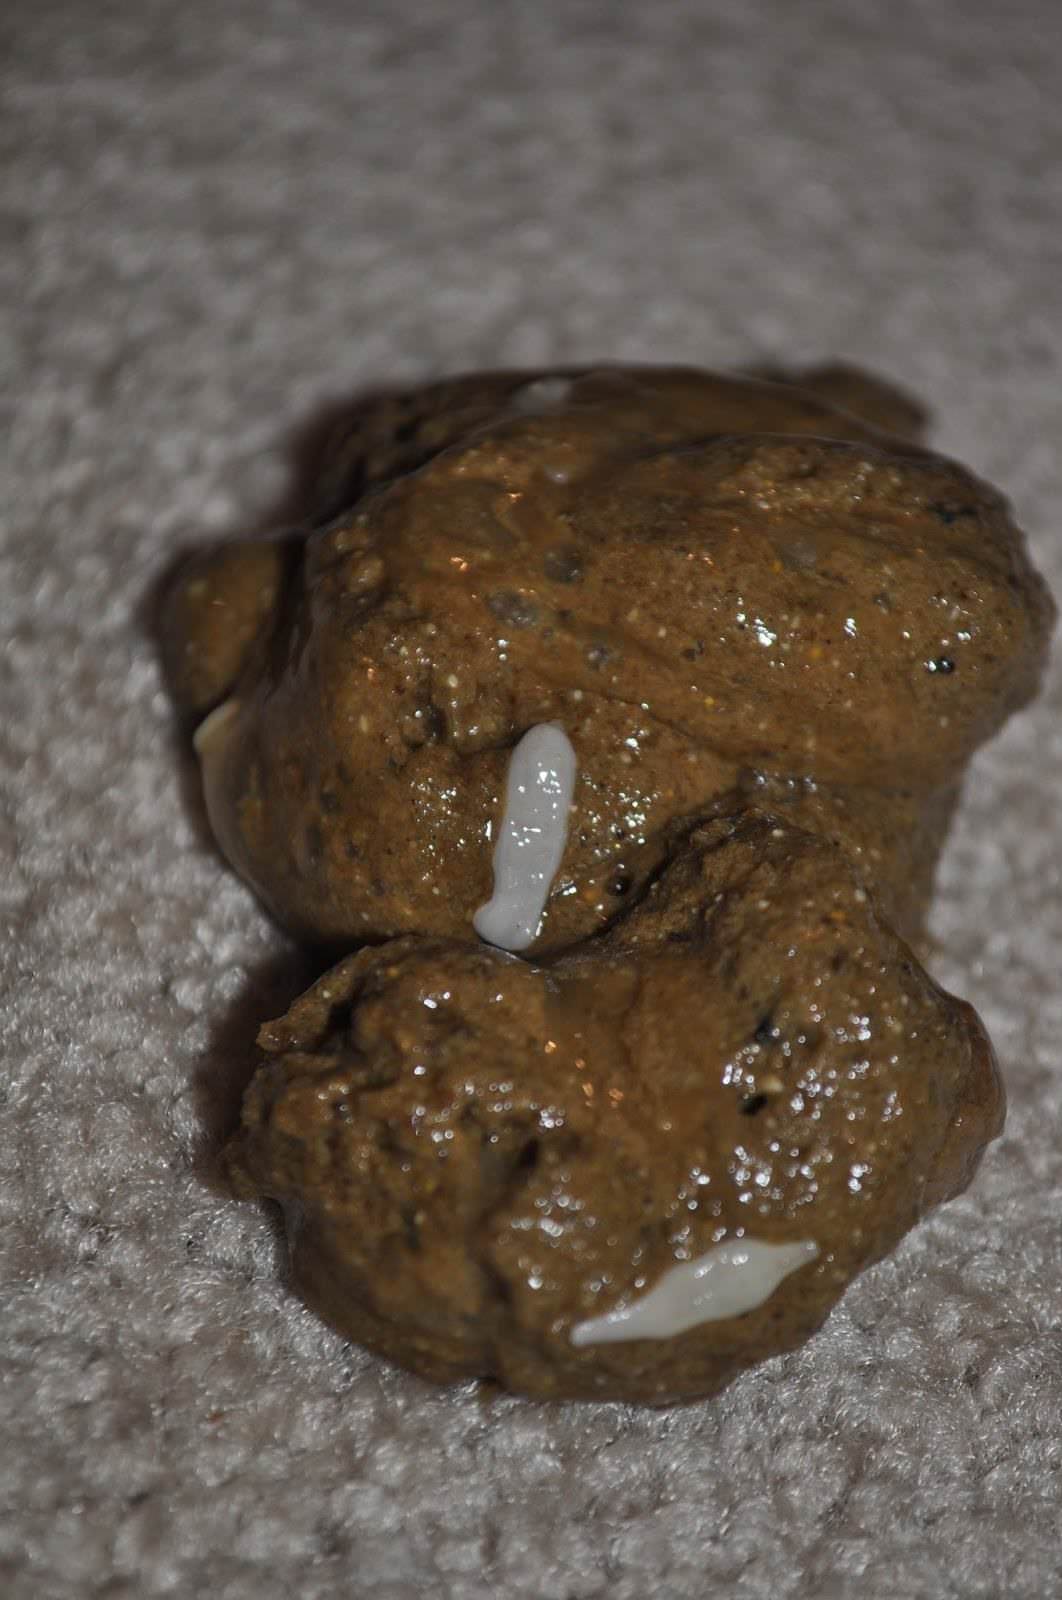 white worm flat head in dog feces